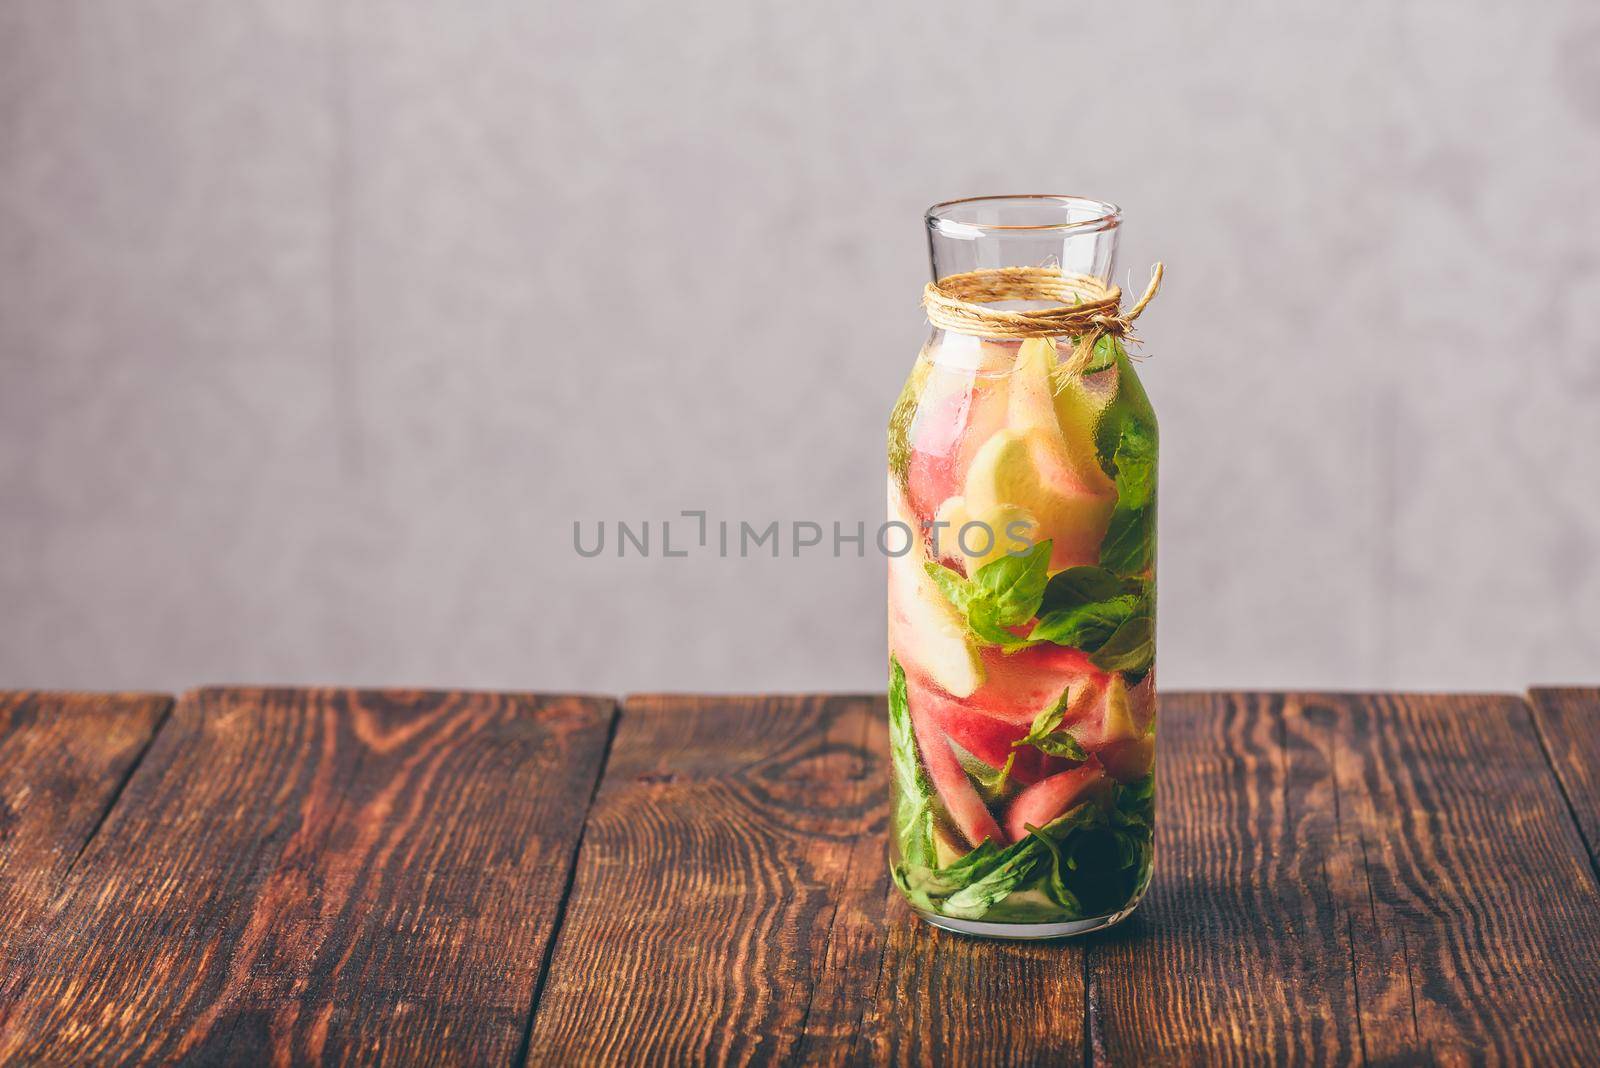 Bottle of Infused Water with Sliced Peach and Basil Leaves.